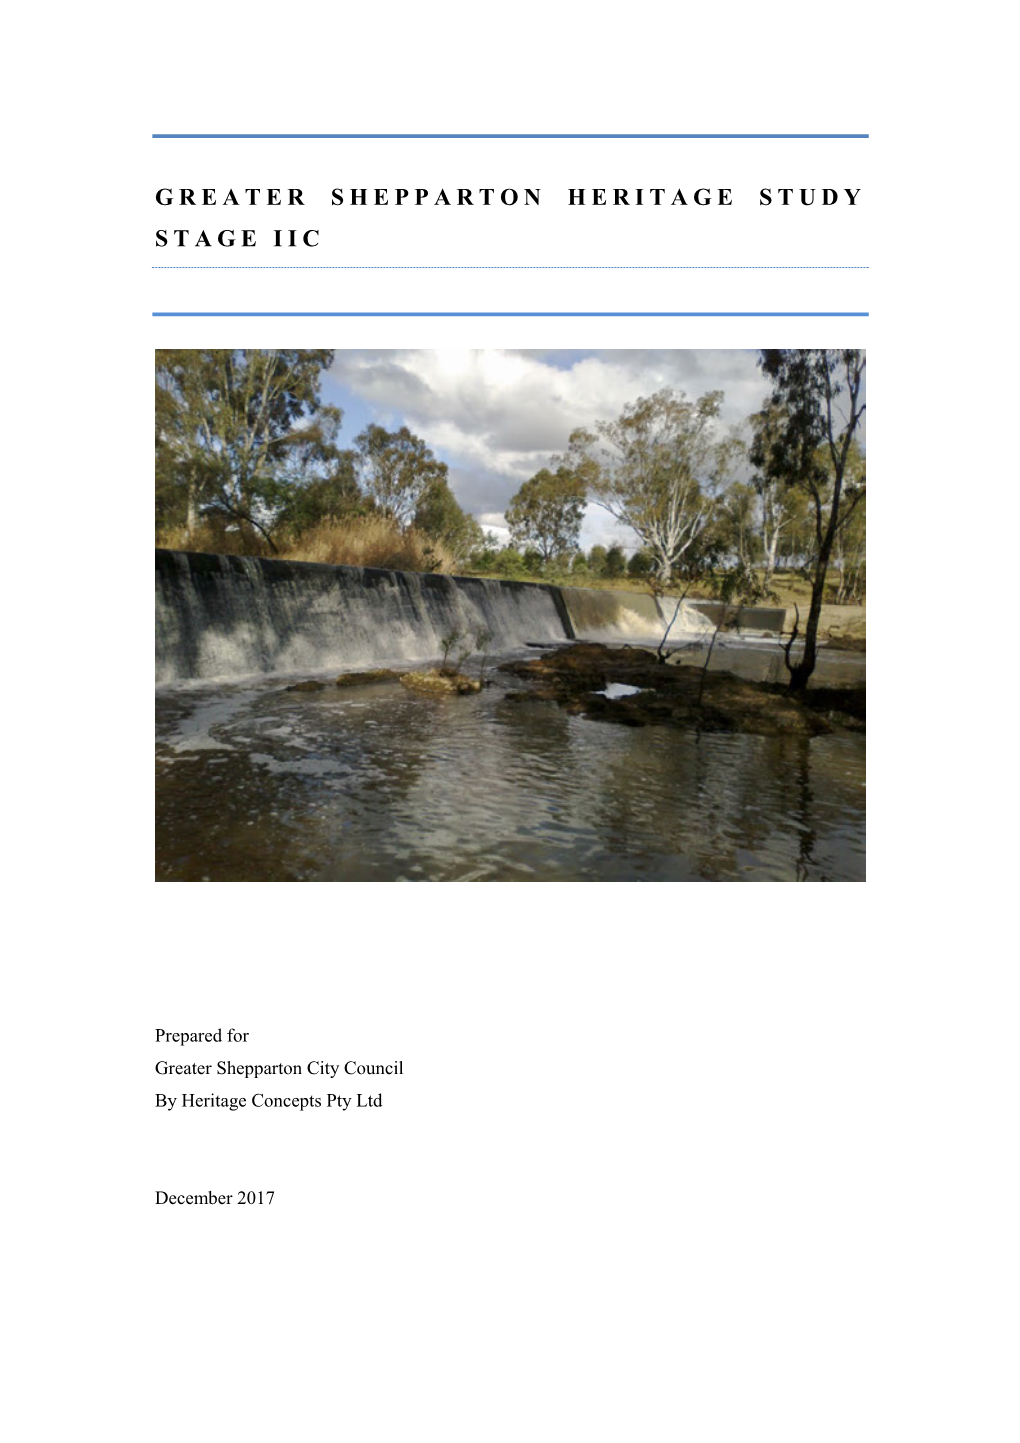 Greater Shepparton Heritage Study Stage Iic